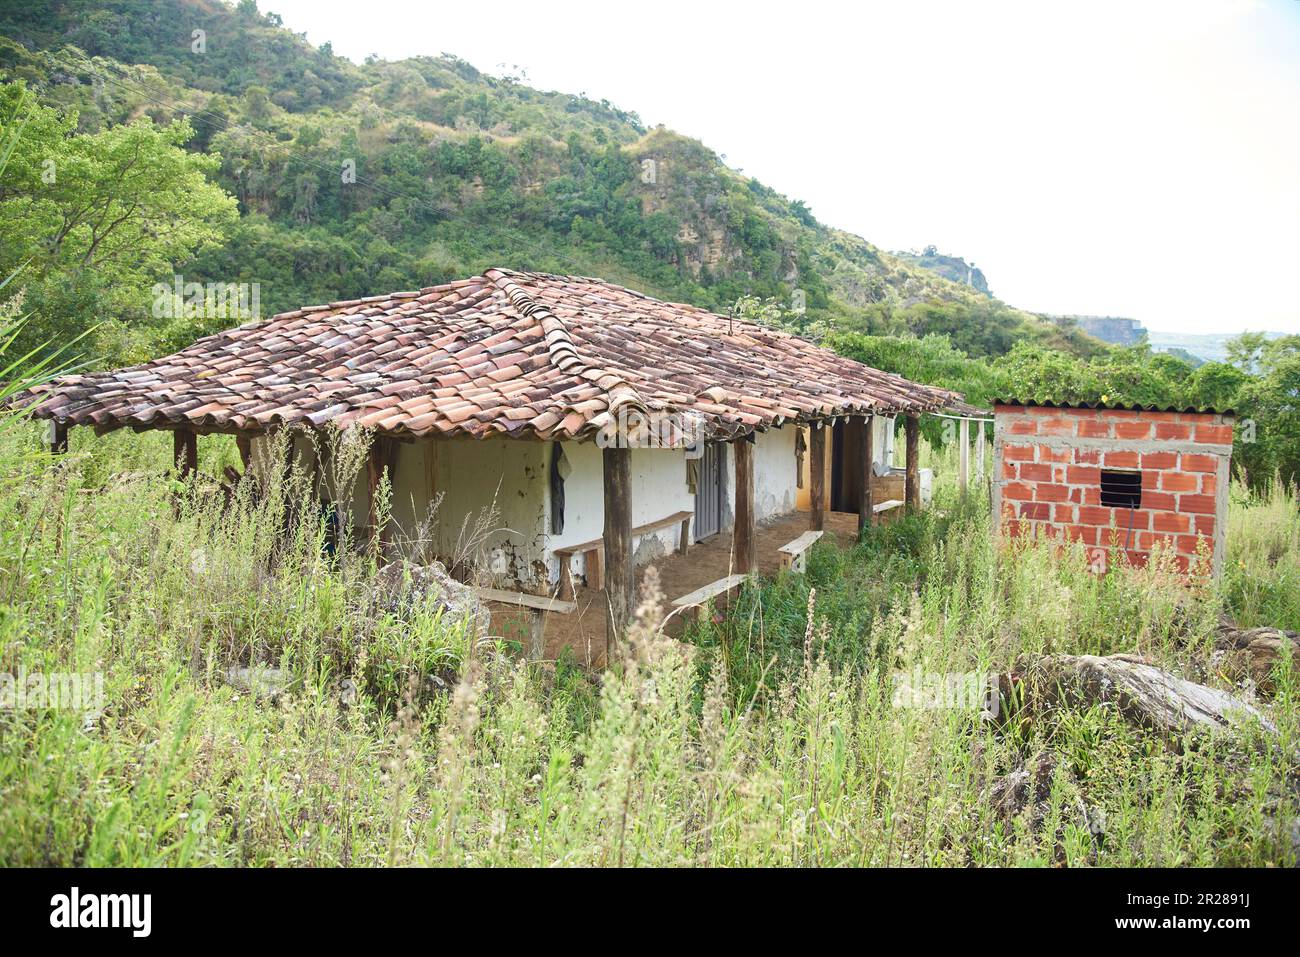 Aratoca, Santander, Colombia, November 22, 2022: Simple rural house surrounded by vegetation in a mountainous area. Stock Photo